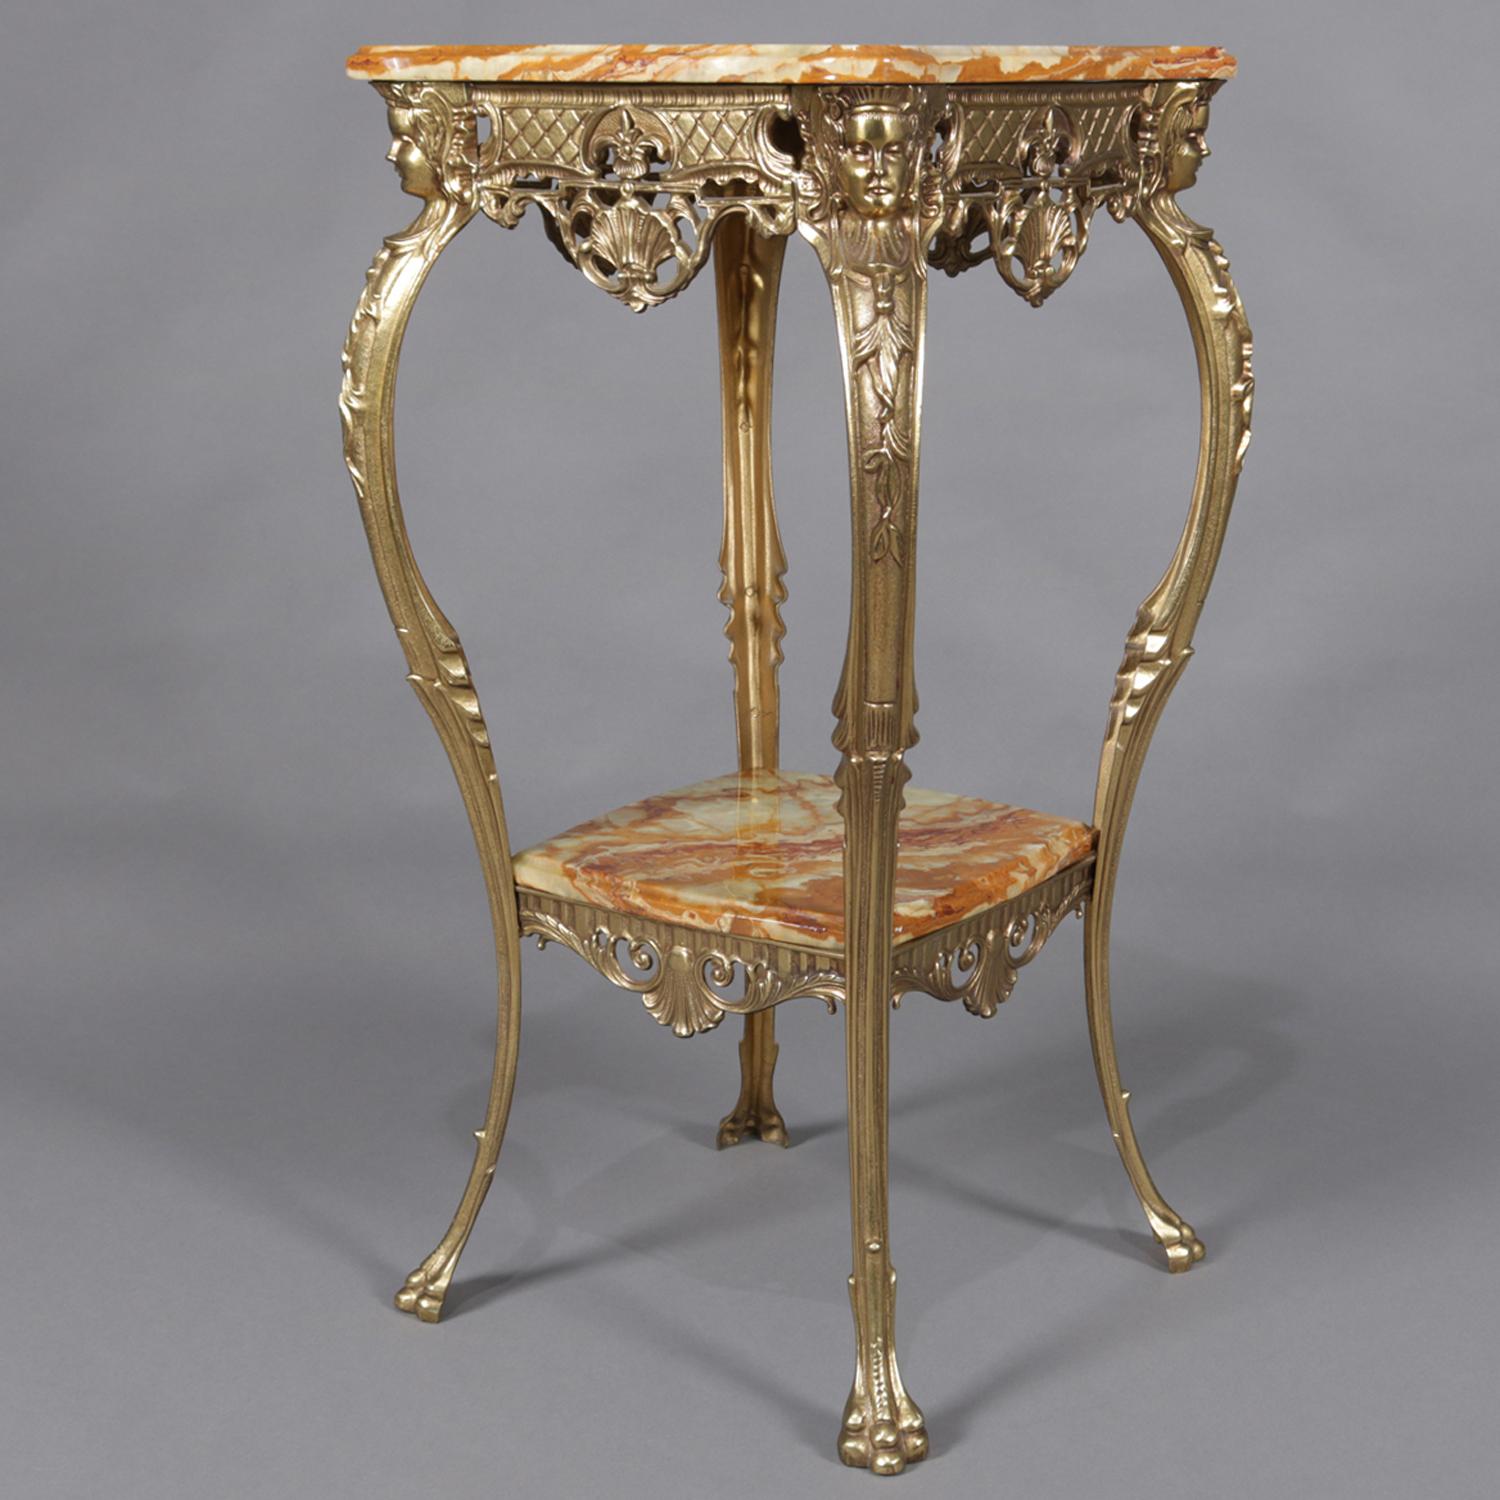 19th Century Antique French Egyptian Revival Figural Gilt Bronze and Marble Plant Stand